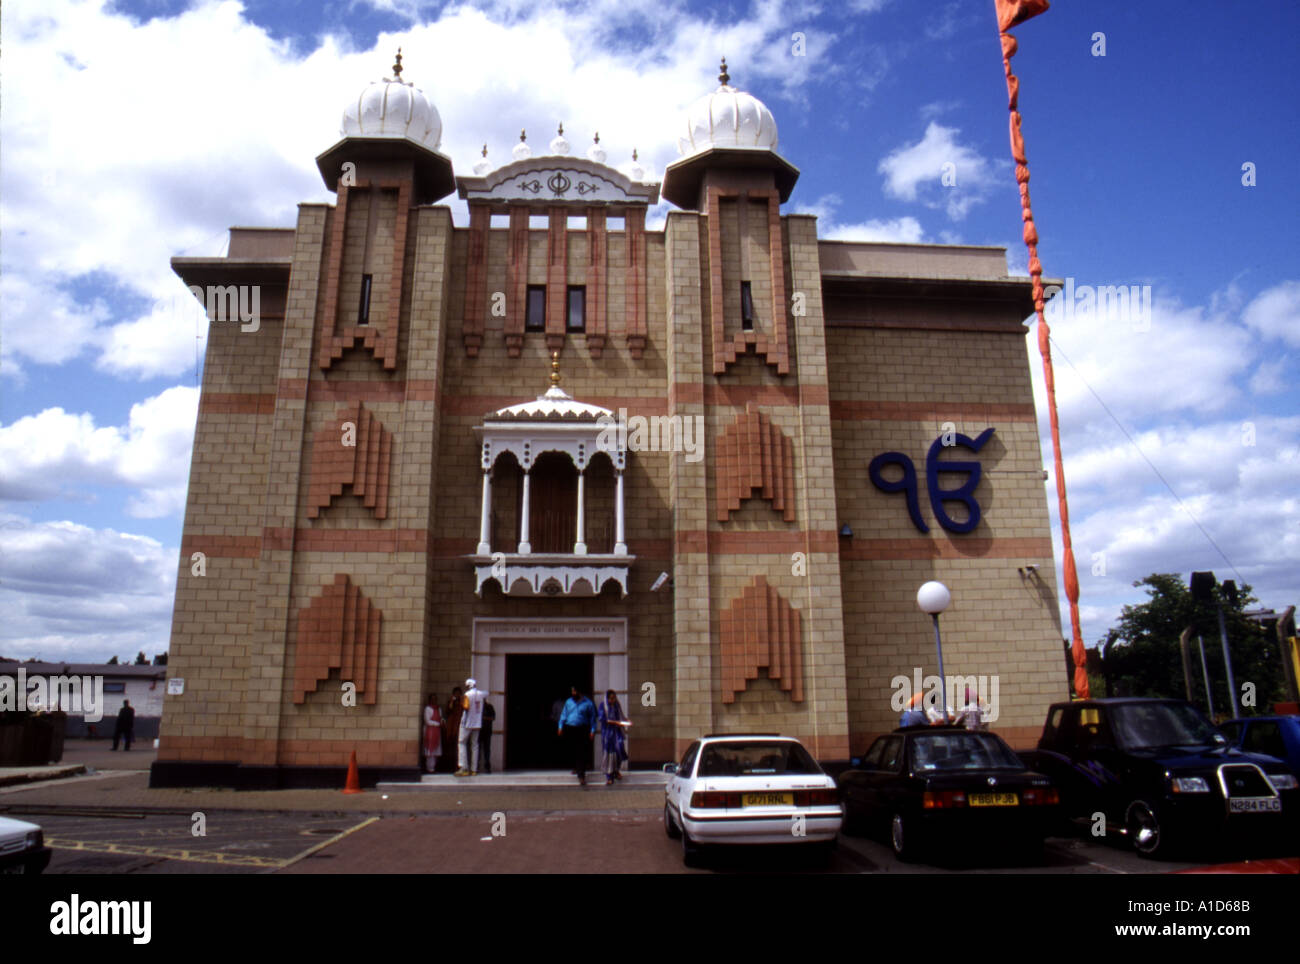 Exterior of a Sikh temple or gurdwara at Hounslow England with the Nishan Sahib, Sikh flag Stock Photo